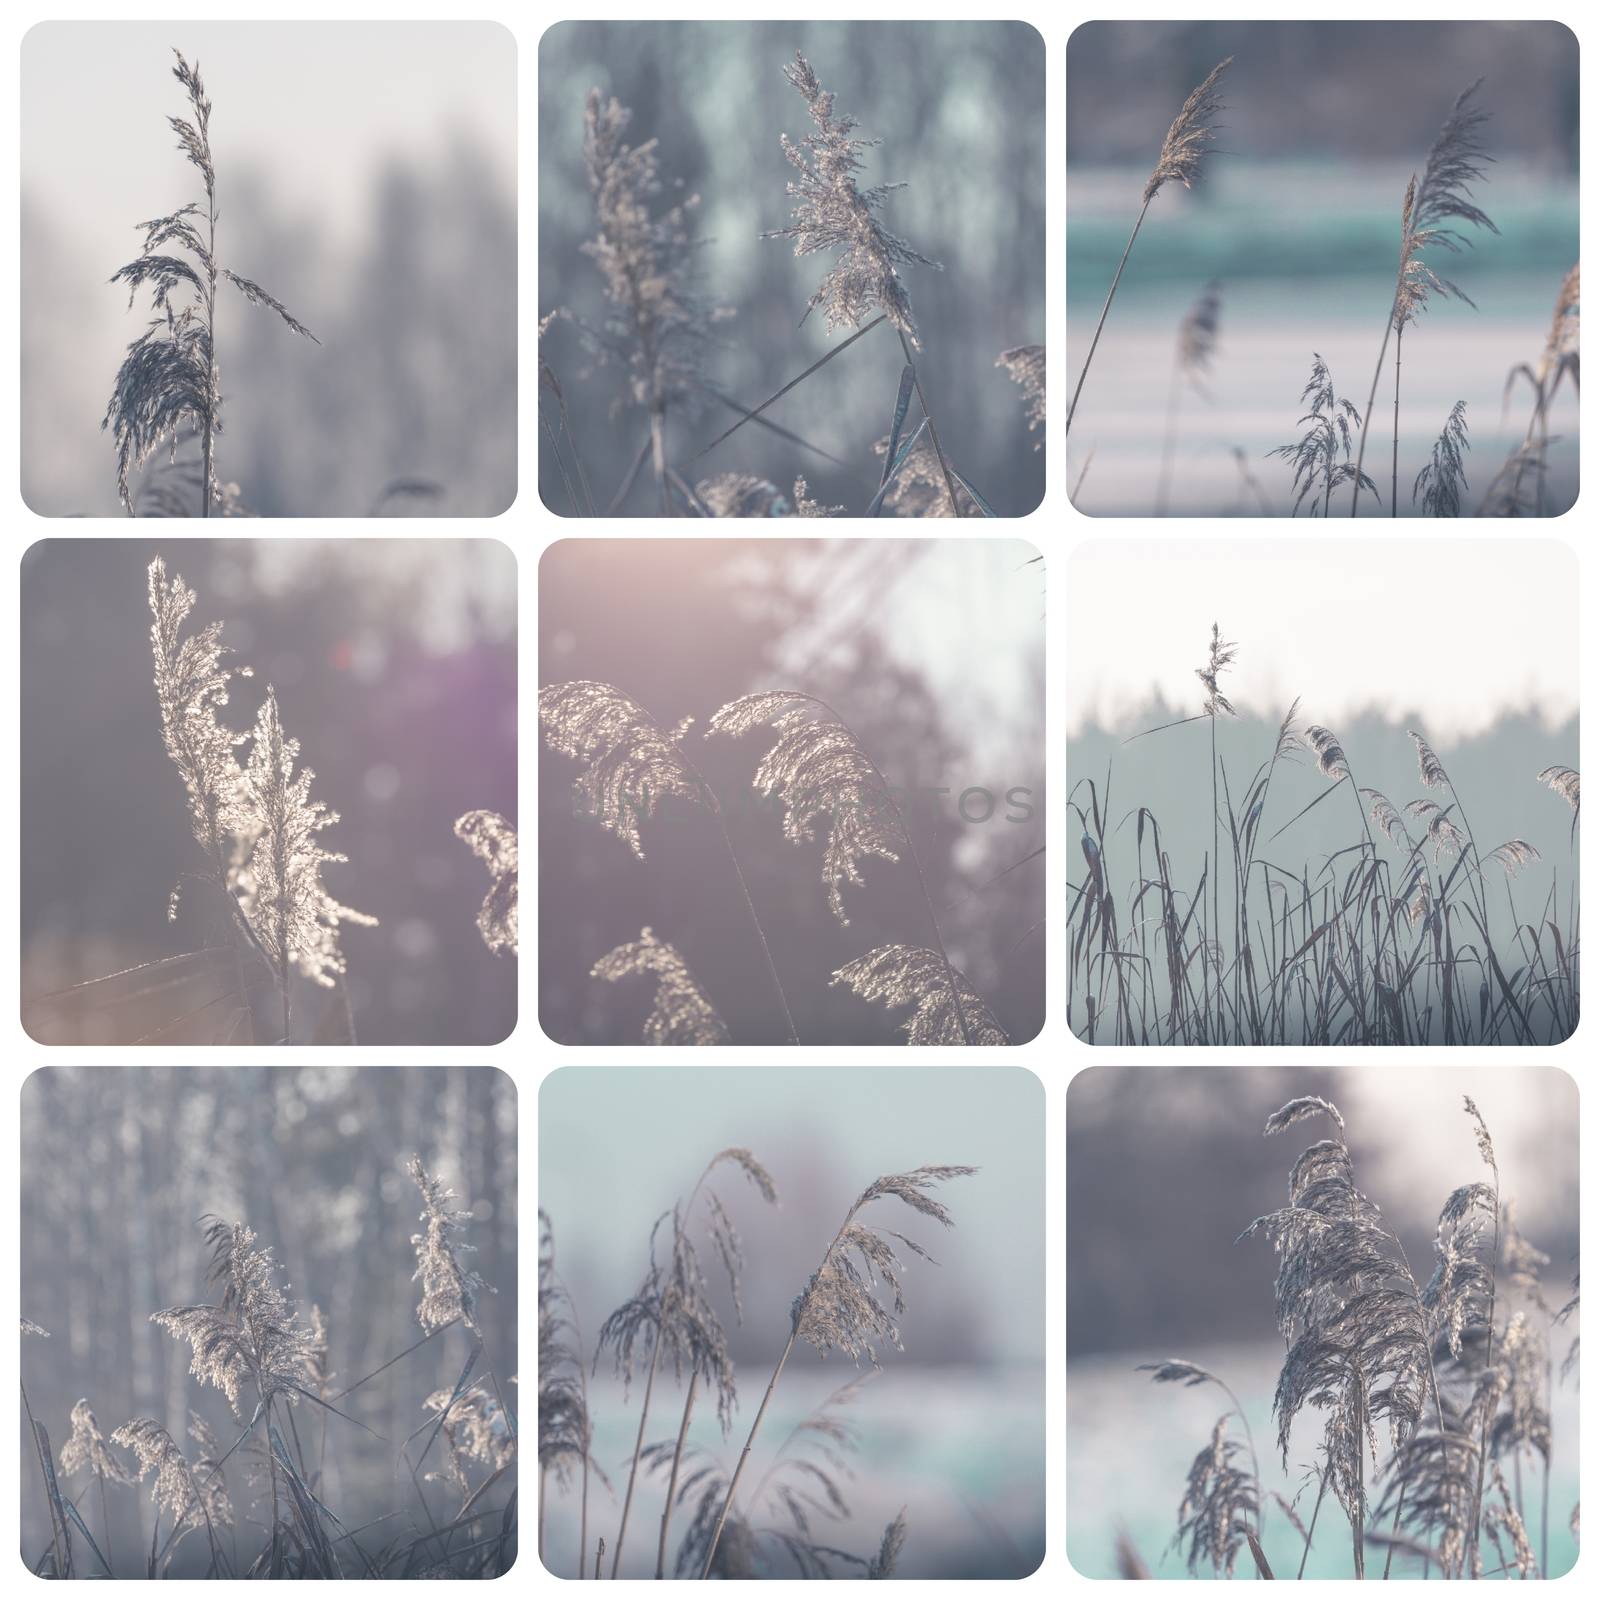 Collage of winter images - travel background (my photos) by mariusz_prusaczyk